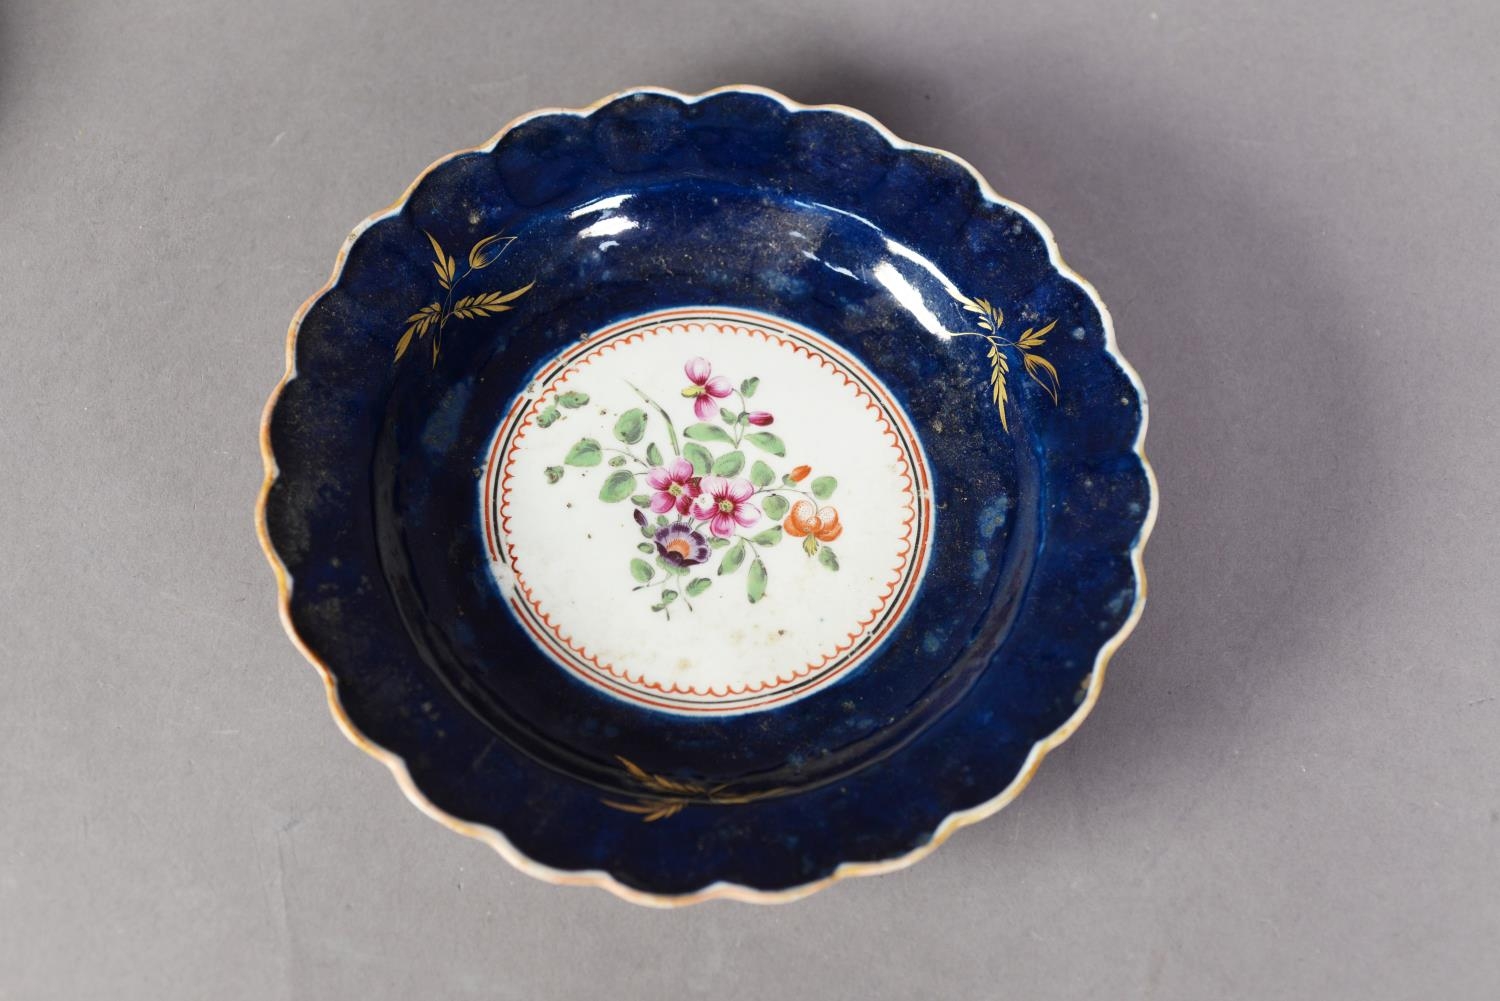 EIGHTEENTH CENTURY WORCESTER PORCELAIN SCALLOPED PLATE, the centre enamelled with a floral spray